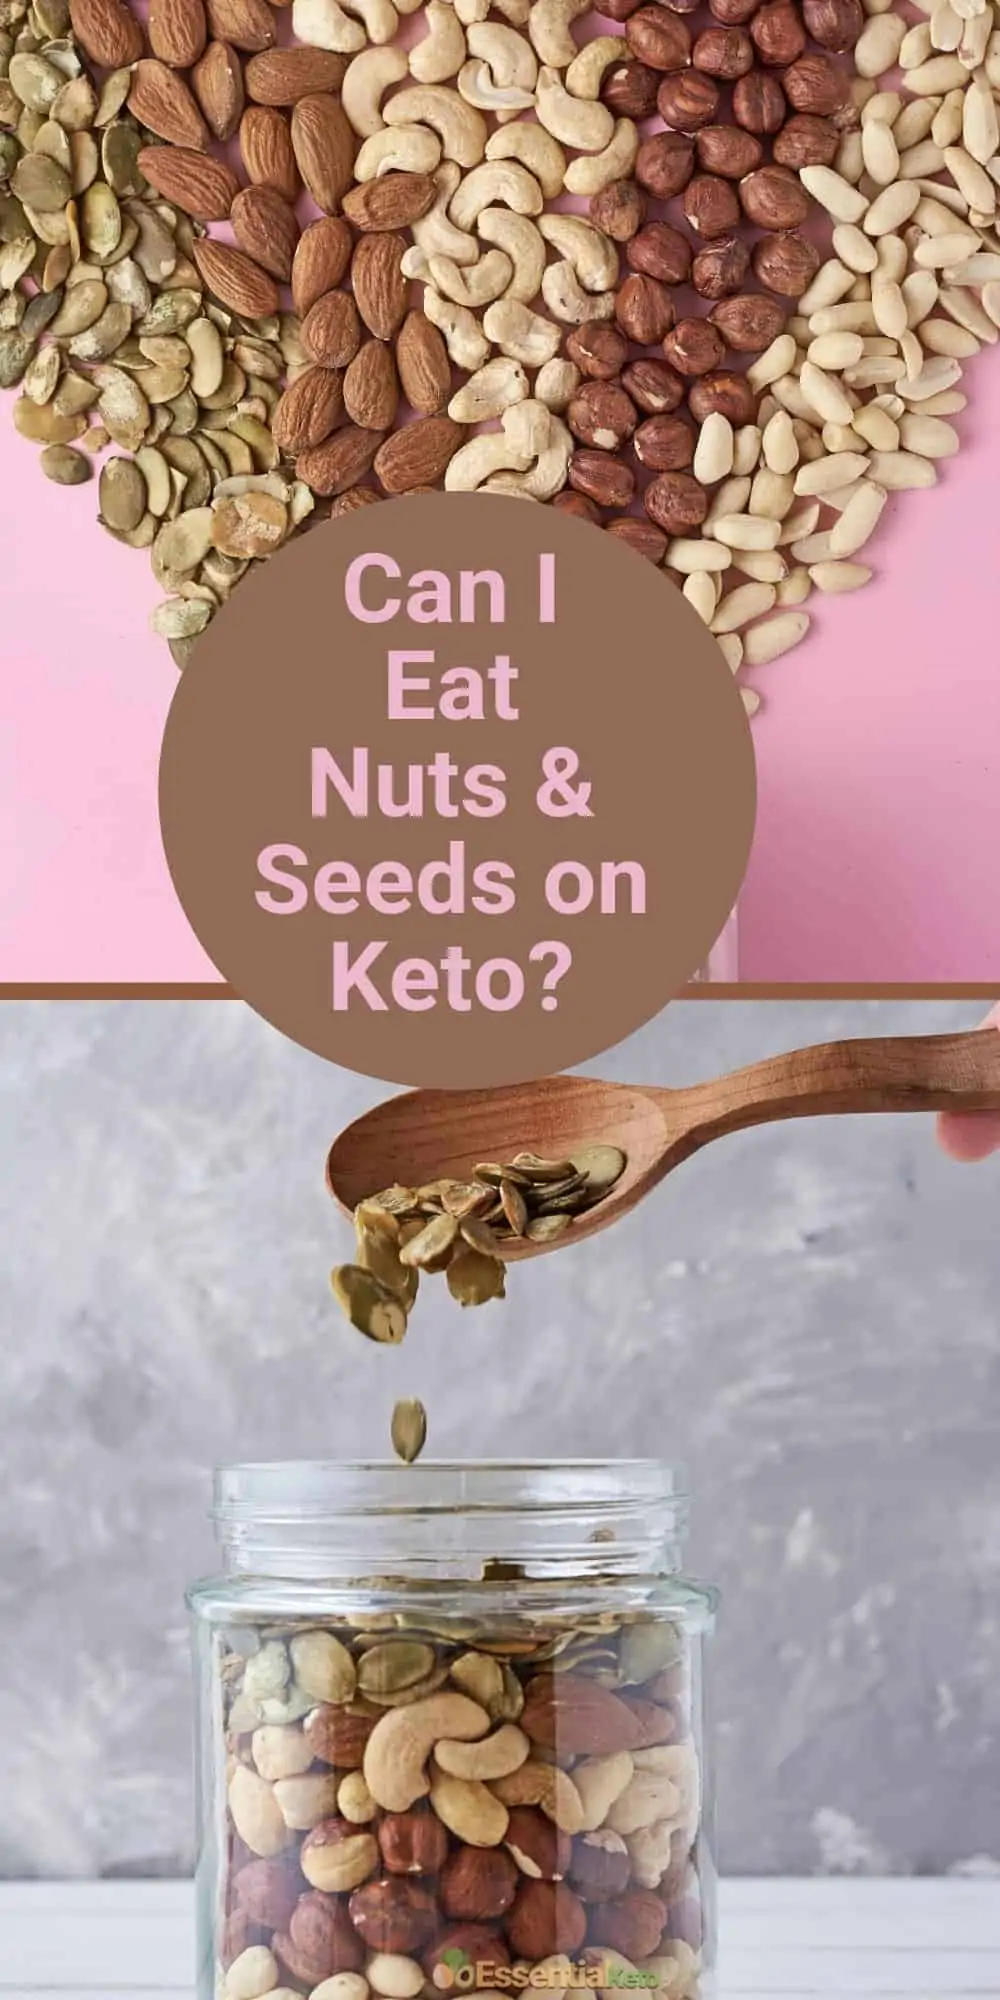 Can I eat nuts and seeds on keto?